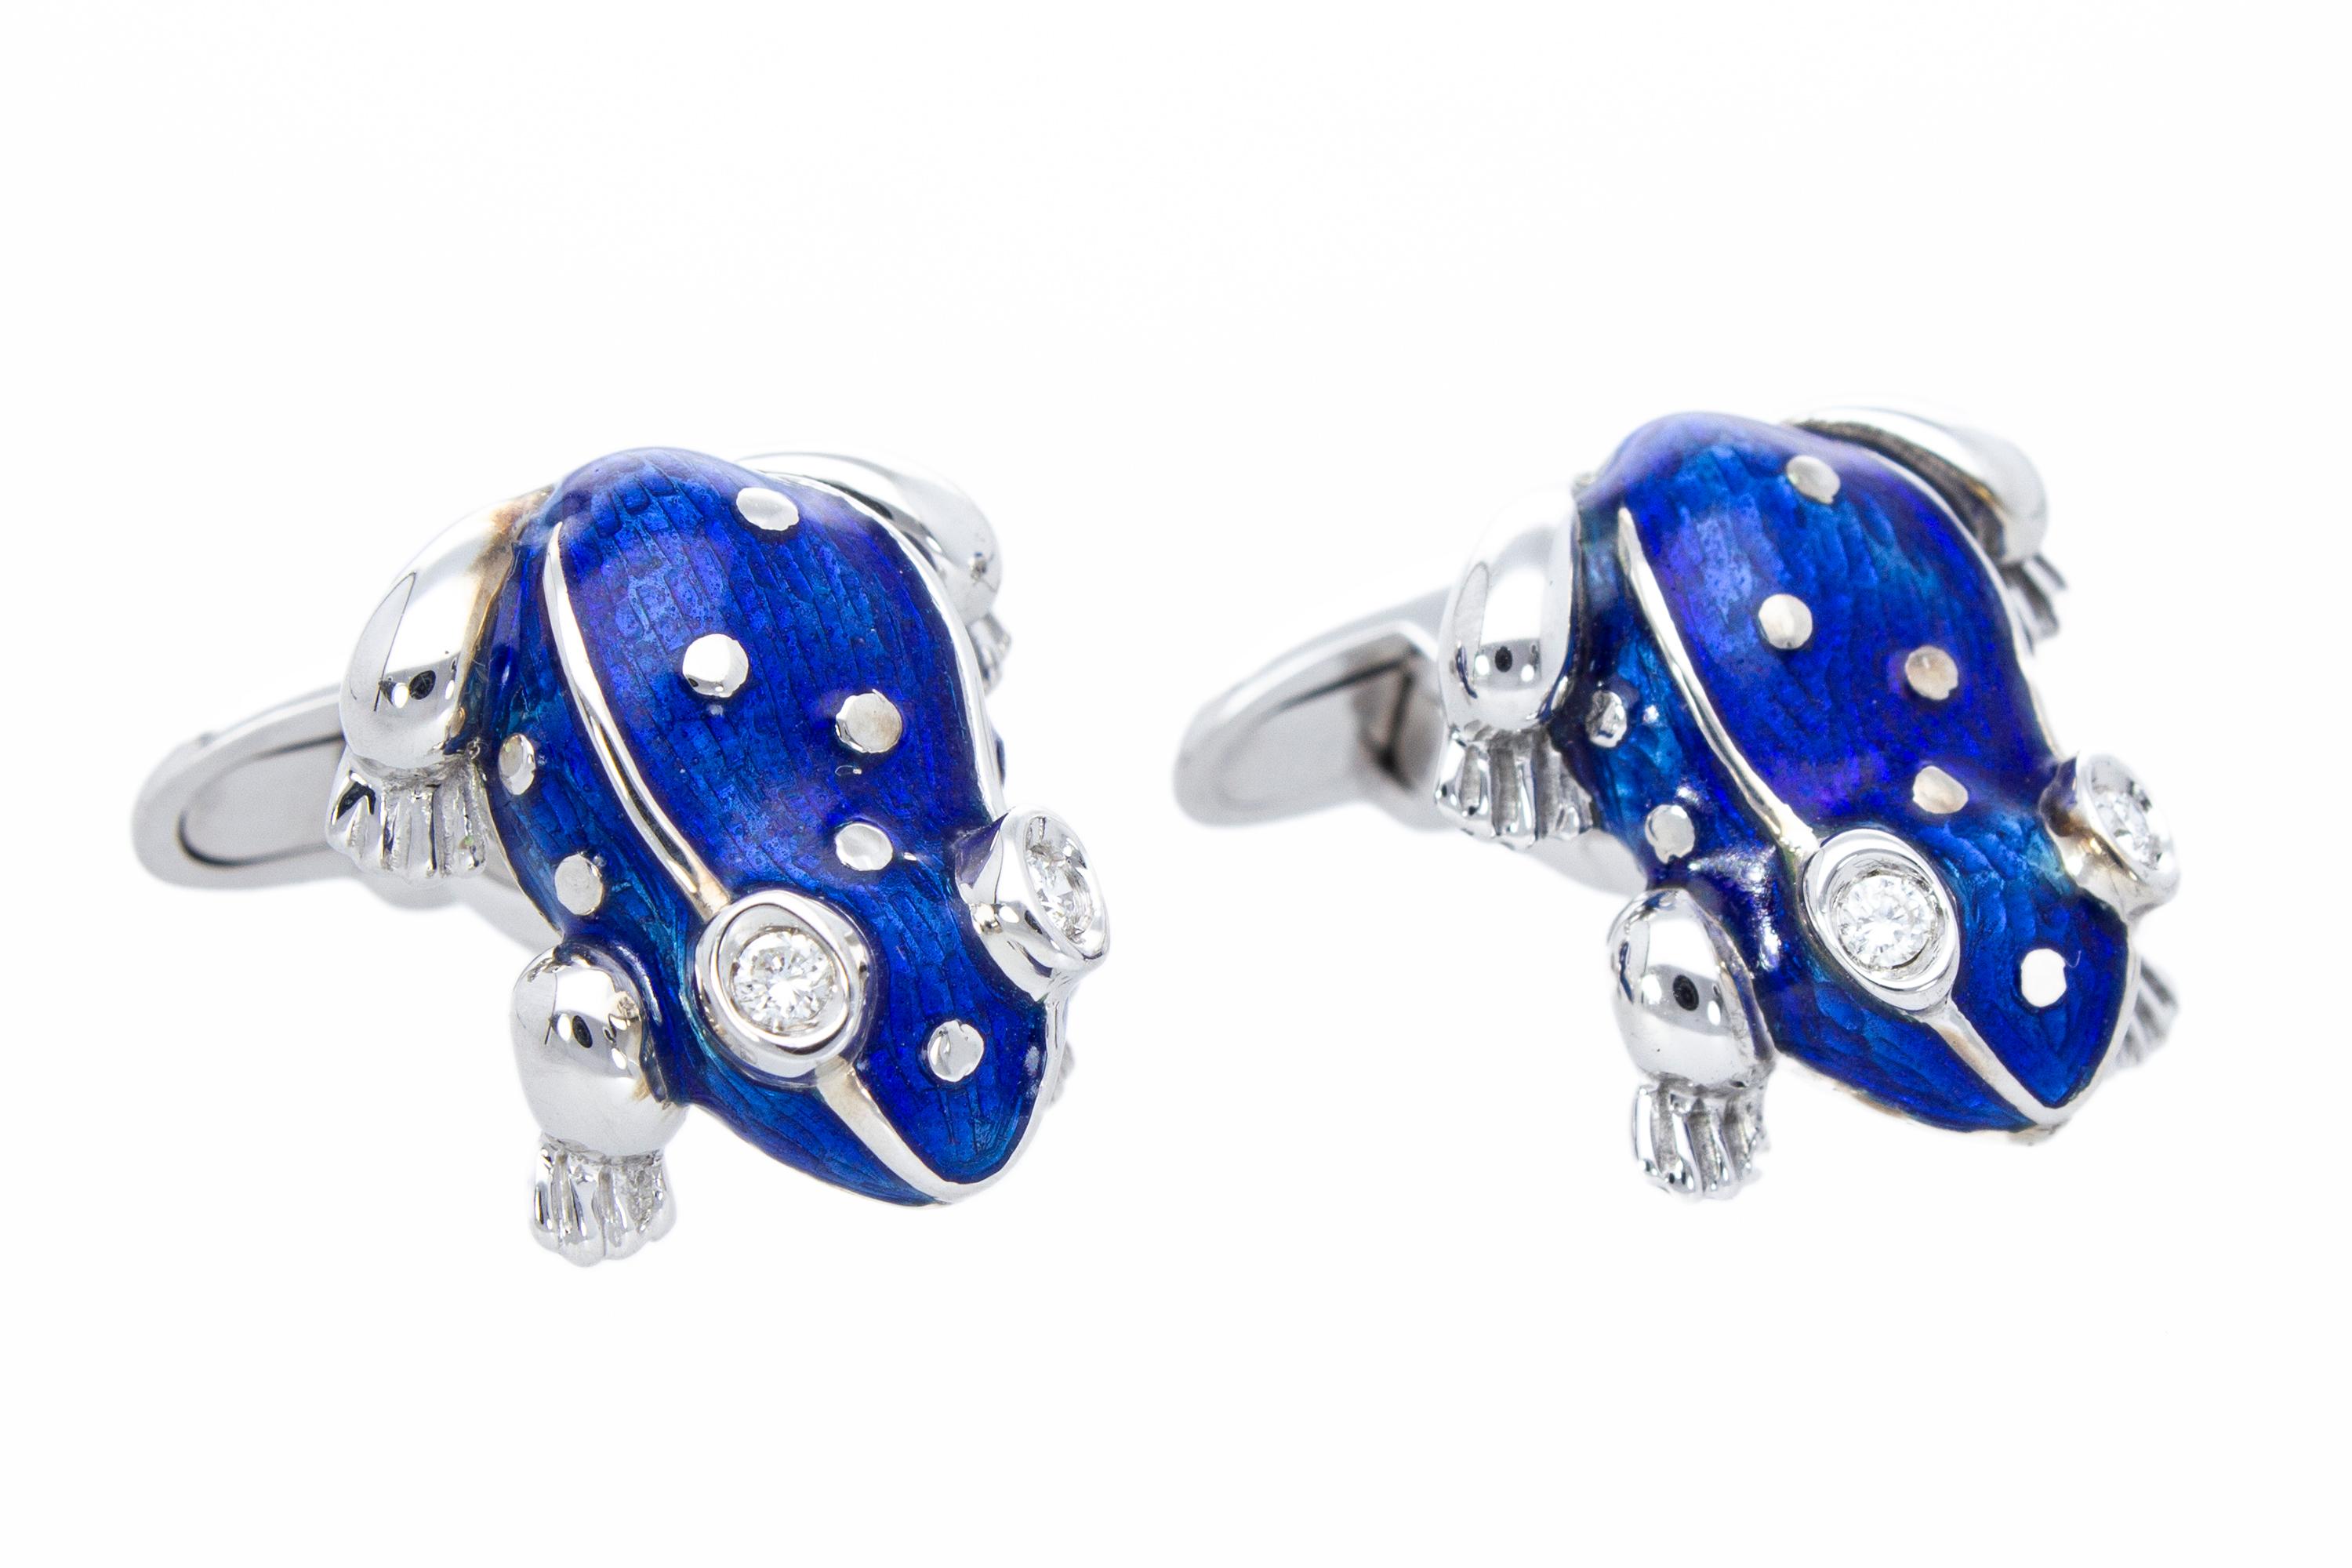 18 Kt White Gold with Blu Enamel Diamonds Frog Cufflinks Handcraft Made in Italy For Sale 13